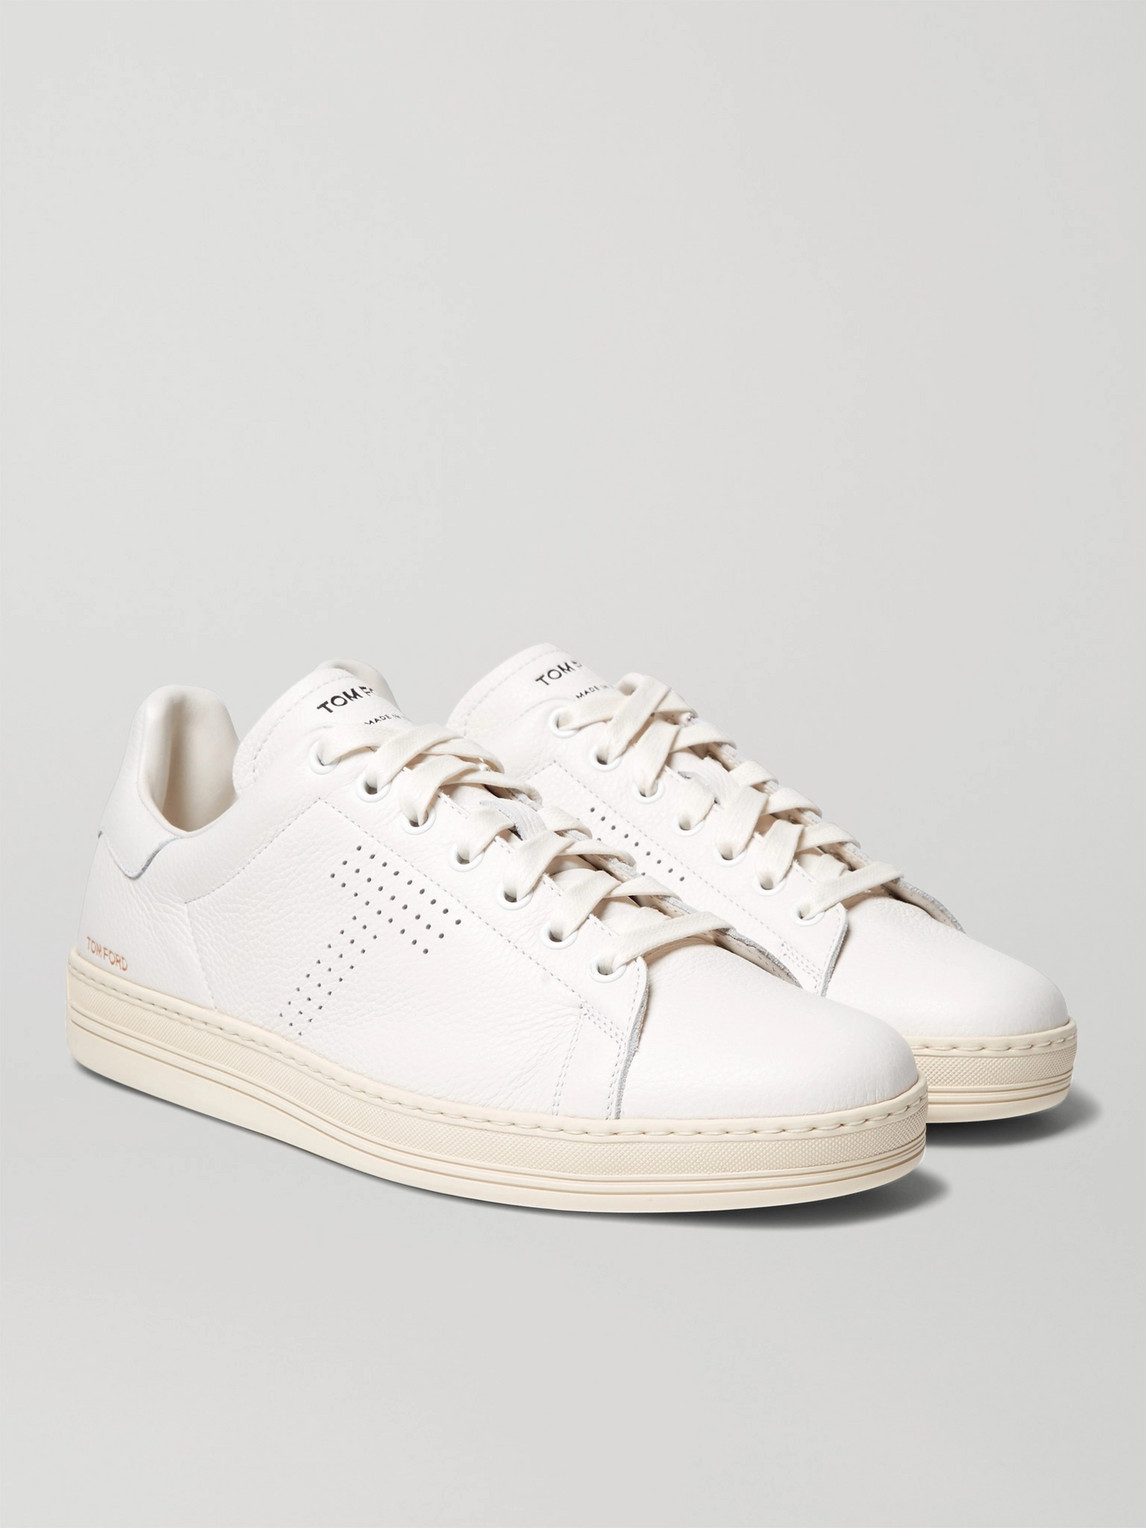 Tom Ford Warwick Perforated Full-grain Leather Sneakers In White | ModeSens